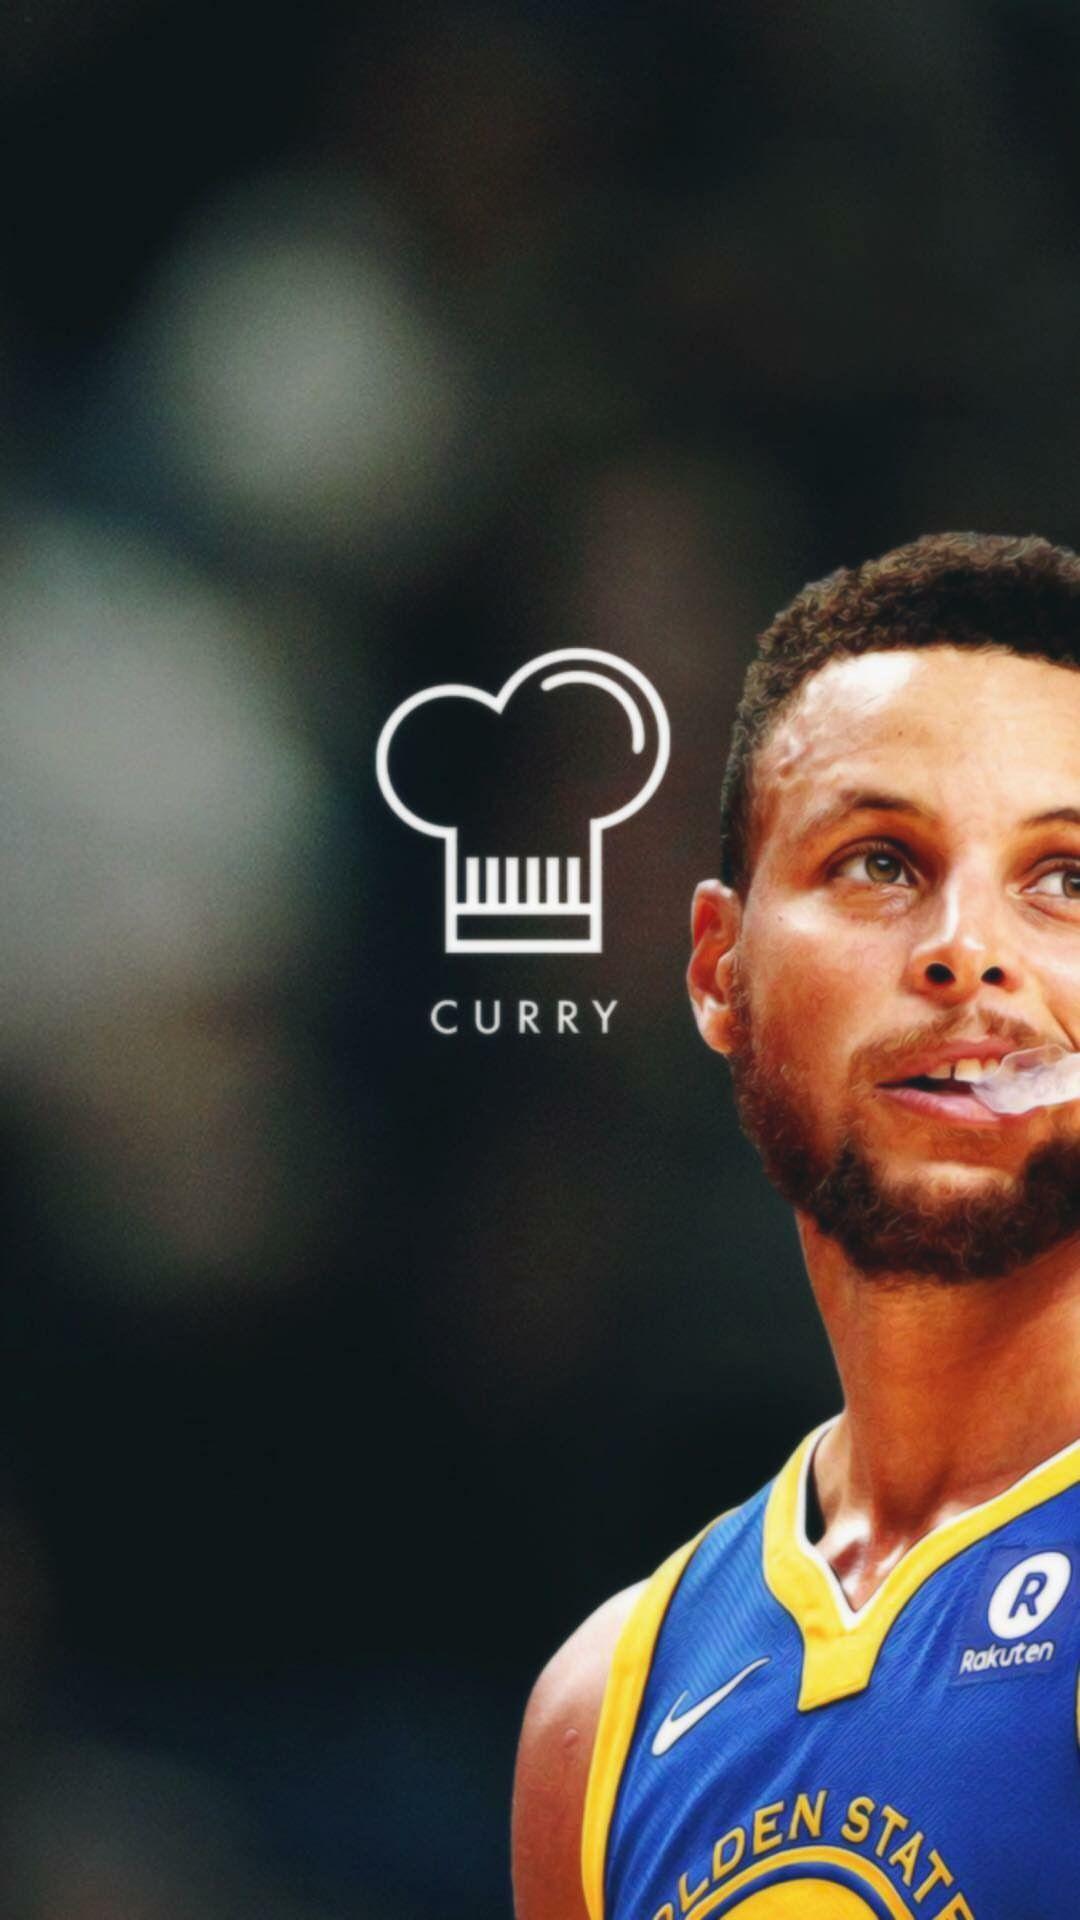 Stephen Curry wallpaper. BASKETBALL. Stephen Curry, Stephen curry